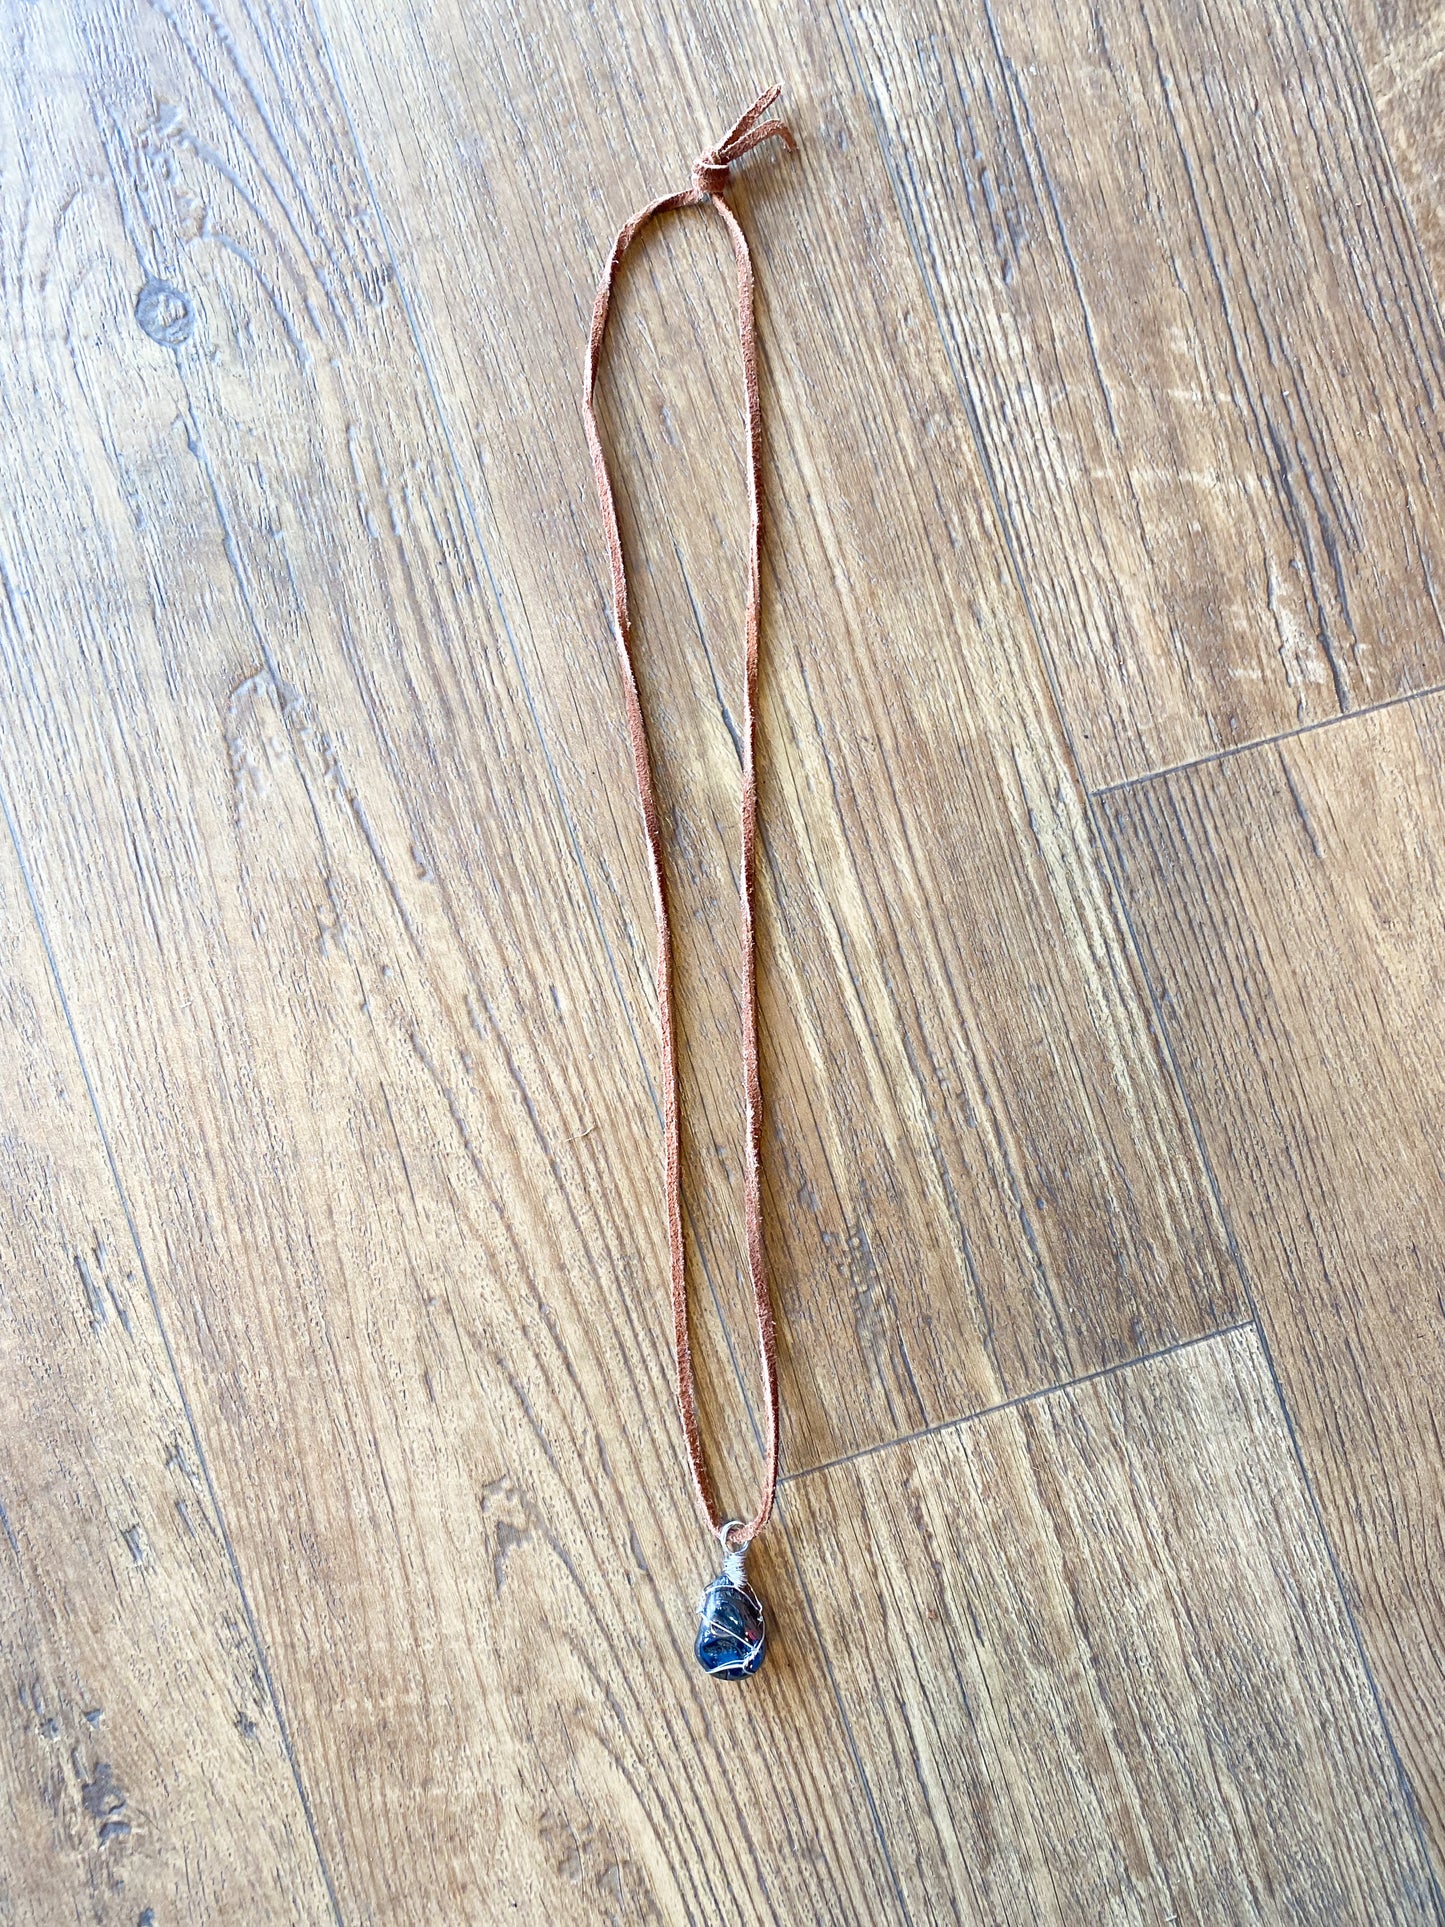 Hematite wire wrapped leather cord necklace